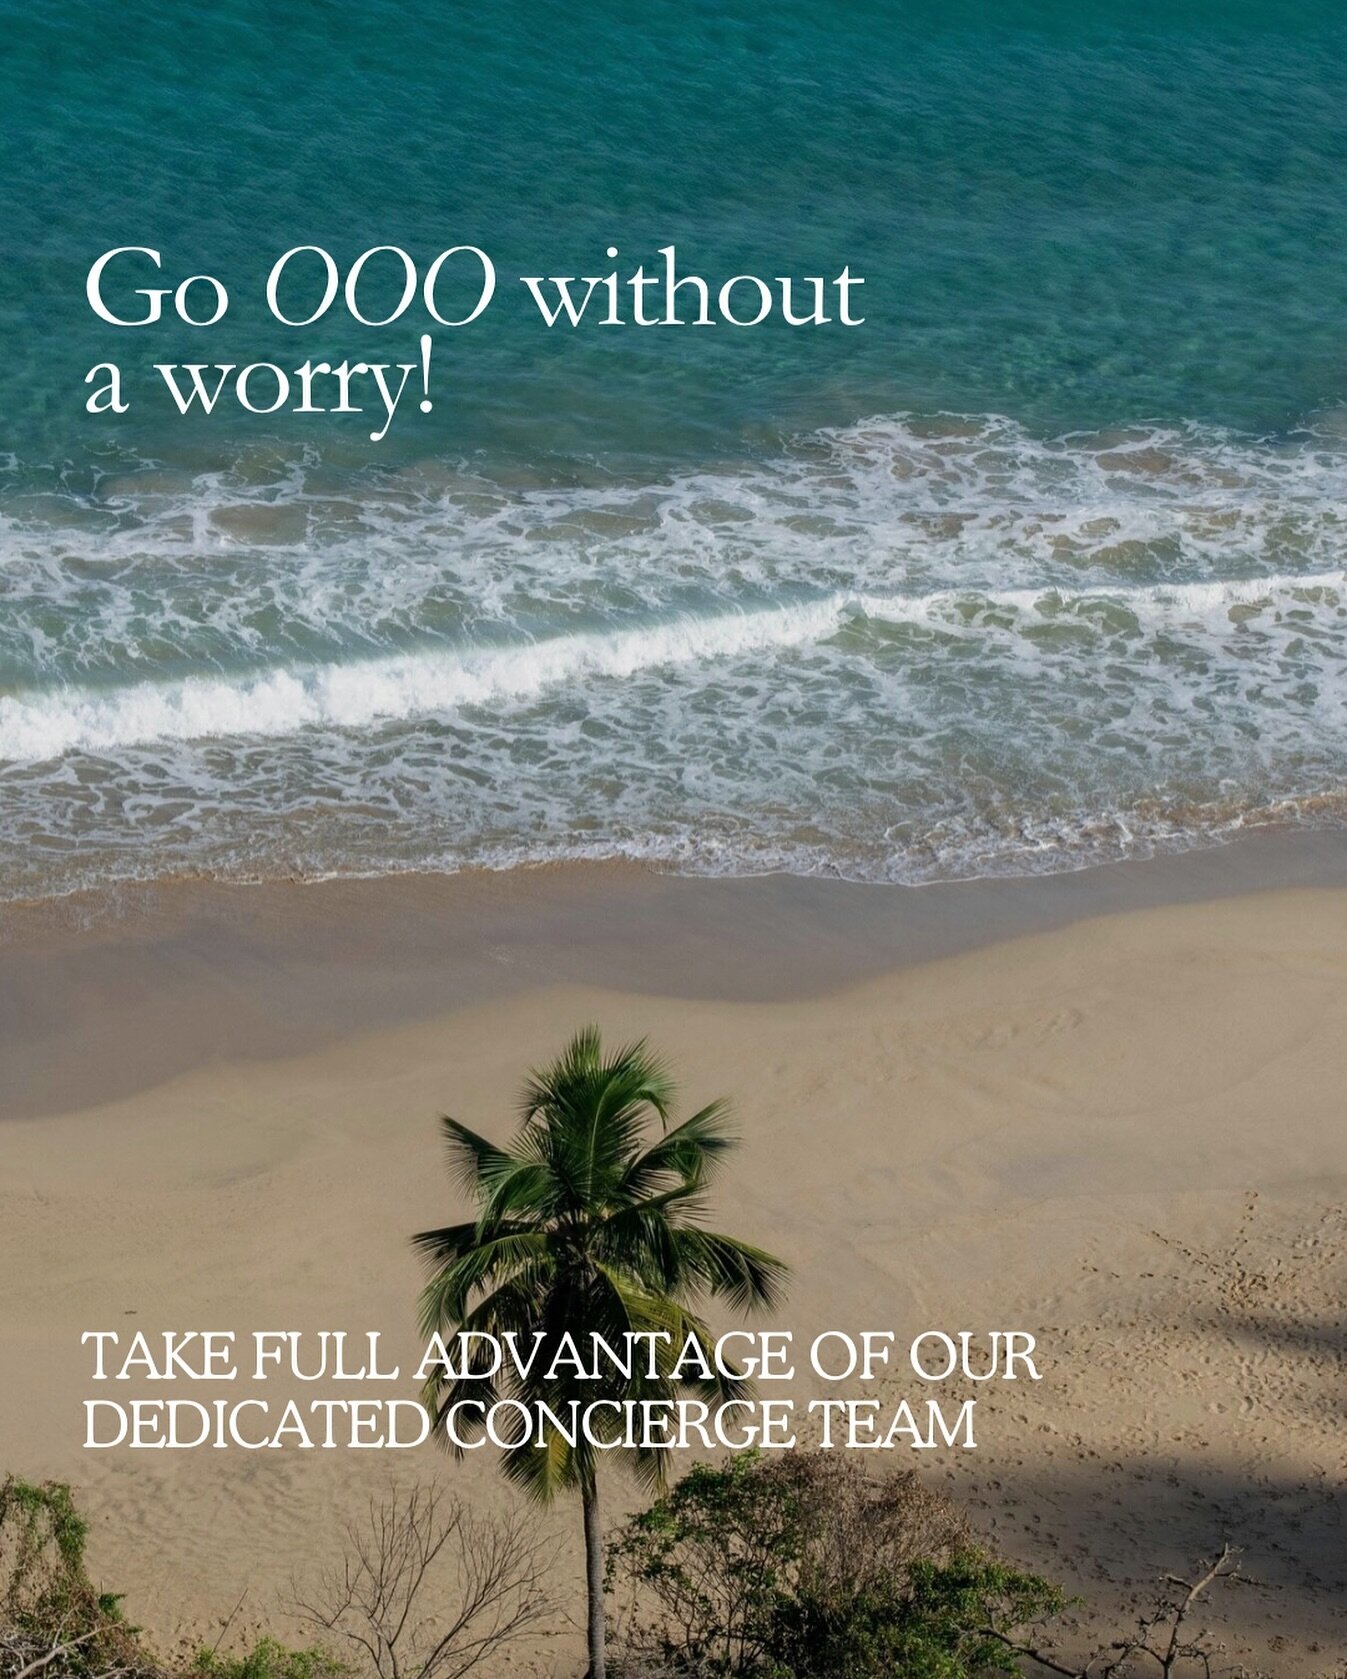 The Luxury Inspector goes &ldquo;beyond&rdquo; in every respect &mdash; and that is what sets us apart. Trust us with your plans and live a worry-free vacation!
&ndash;
#TheLuxuryInspector #TravelConcierge #TravelAgency